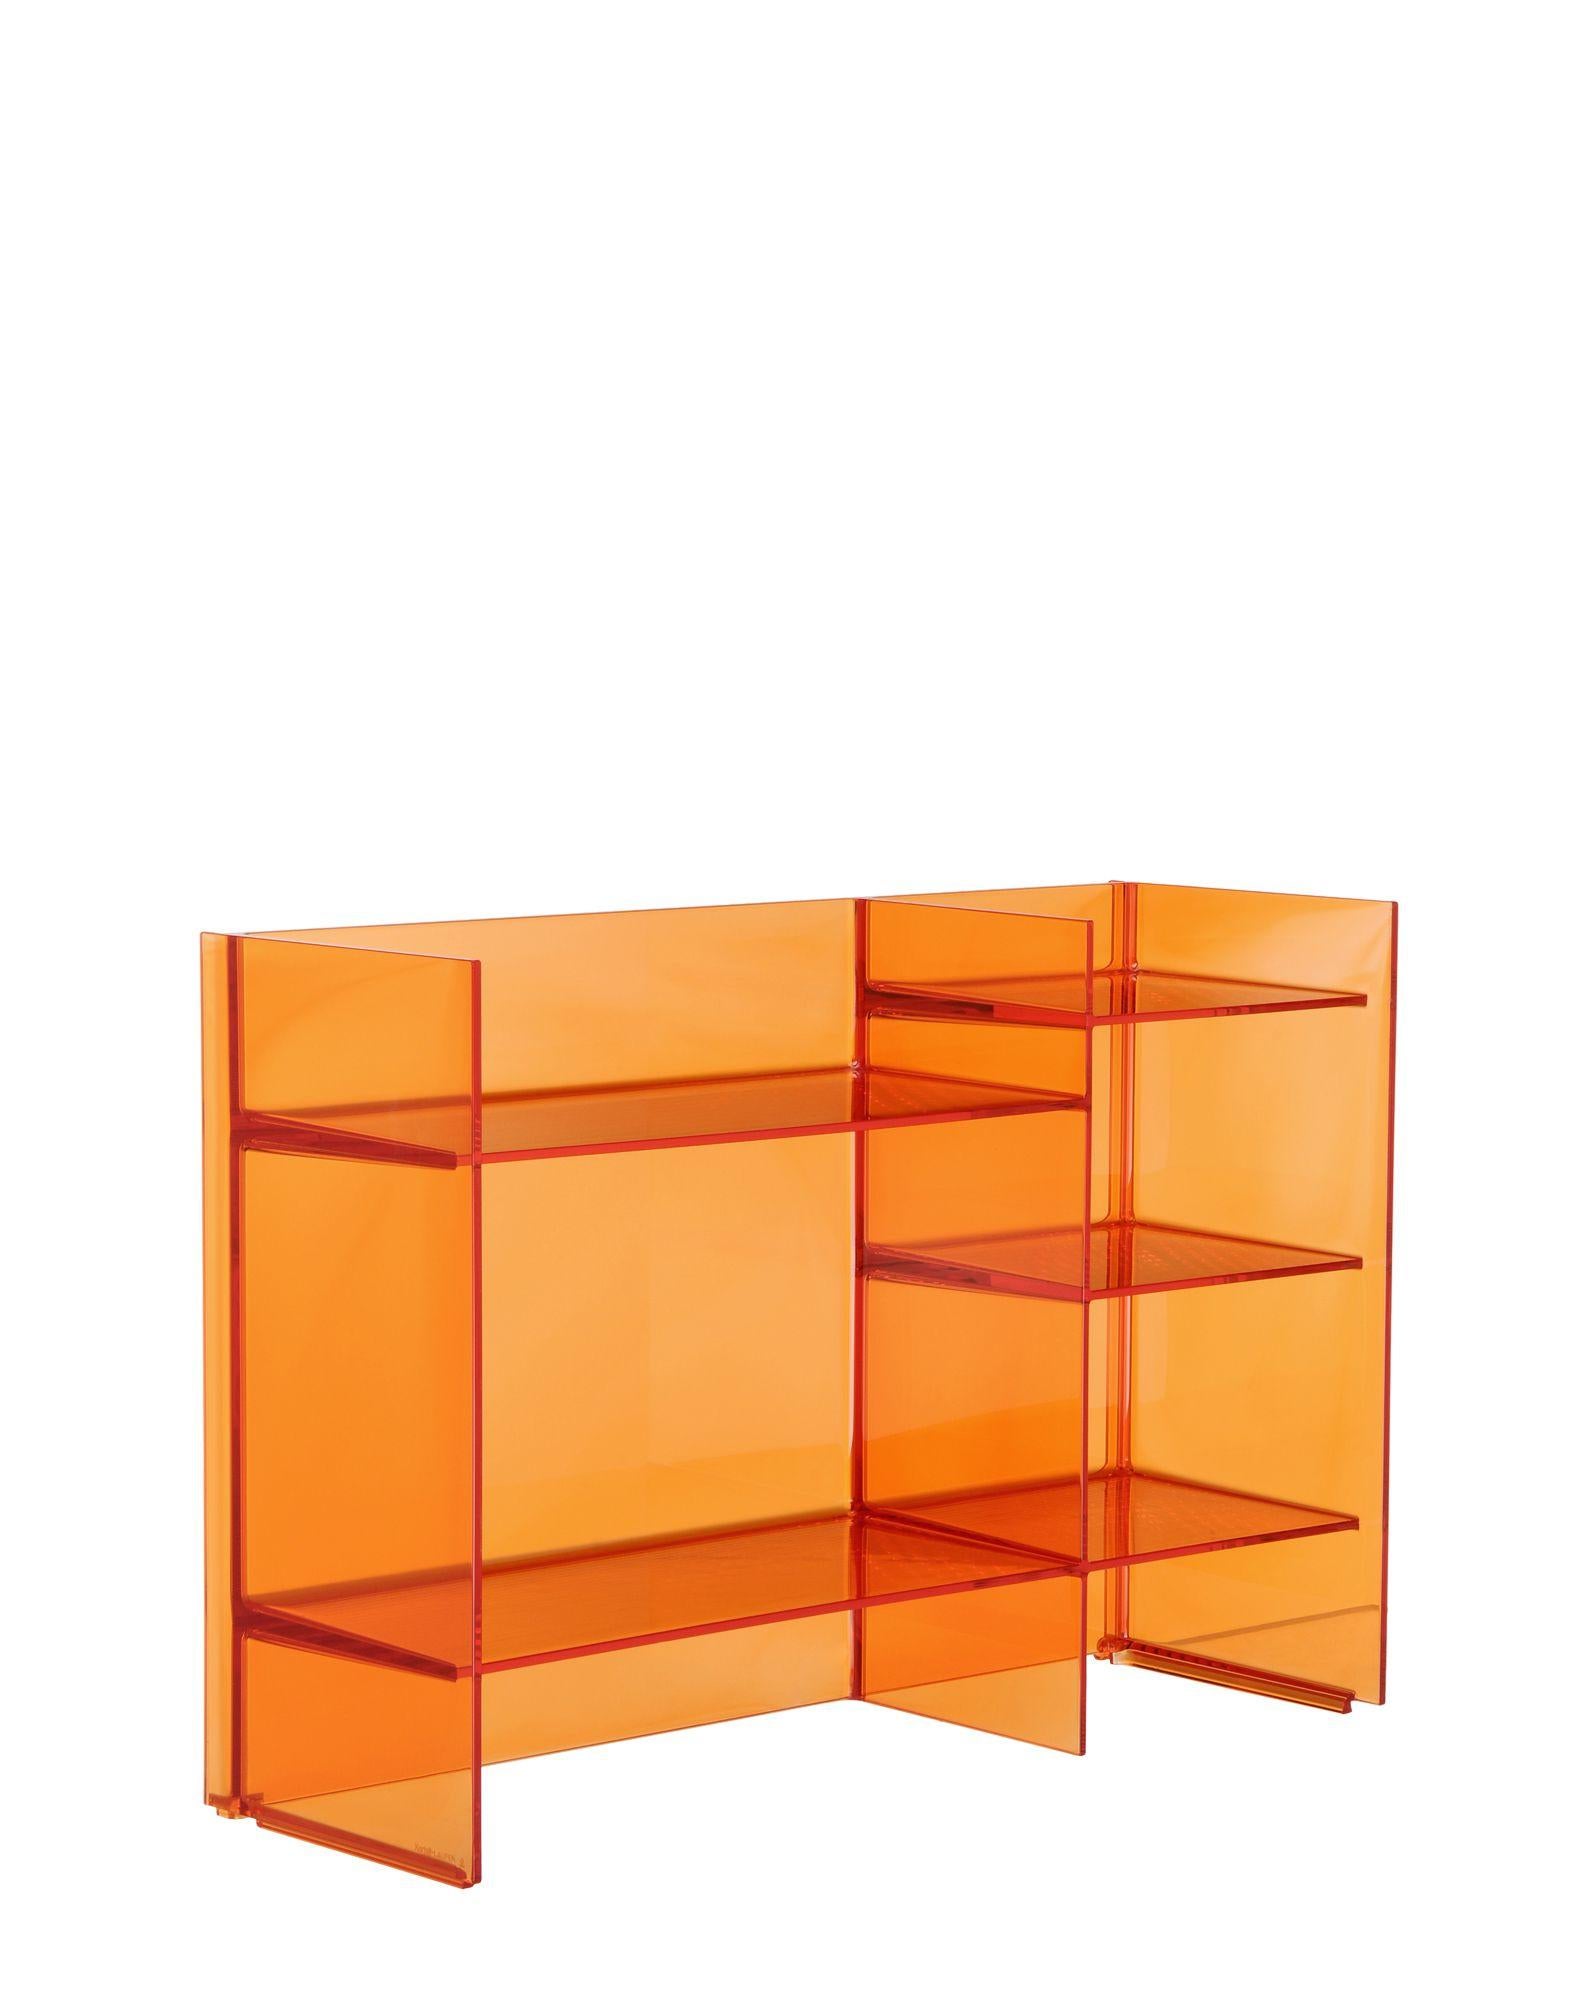 Multi-shaped and multi-purpose shelving system, stackable and modular, offering the possibility of creating a variety of geometric and chromatic compositions. This accessory can play the Dual role as both container and room divider. IT IS a